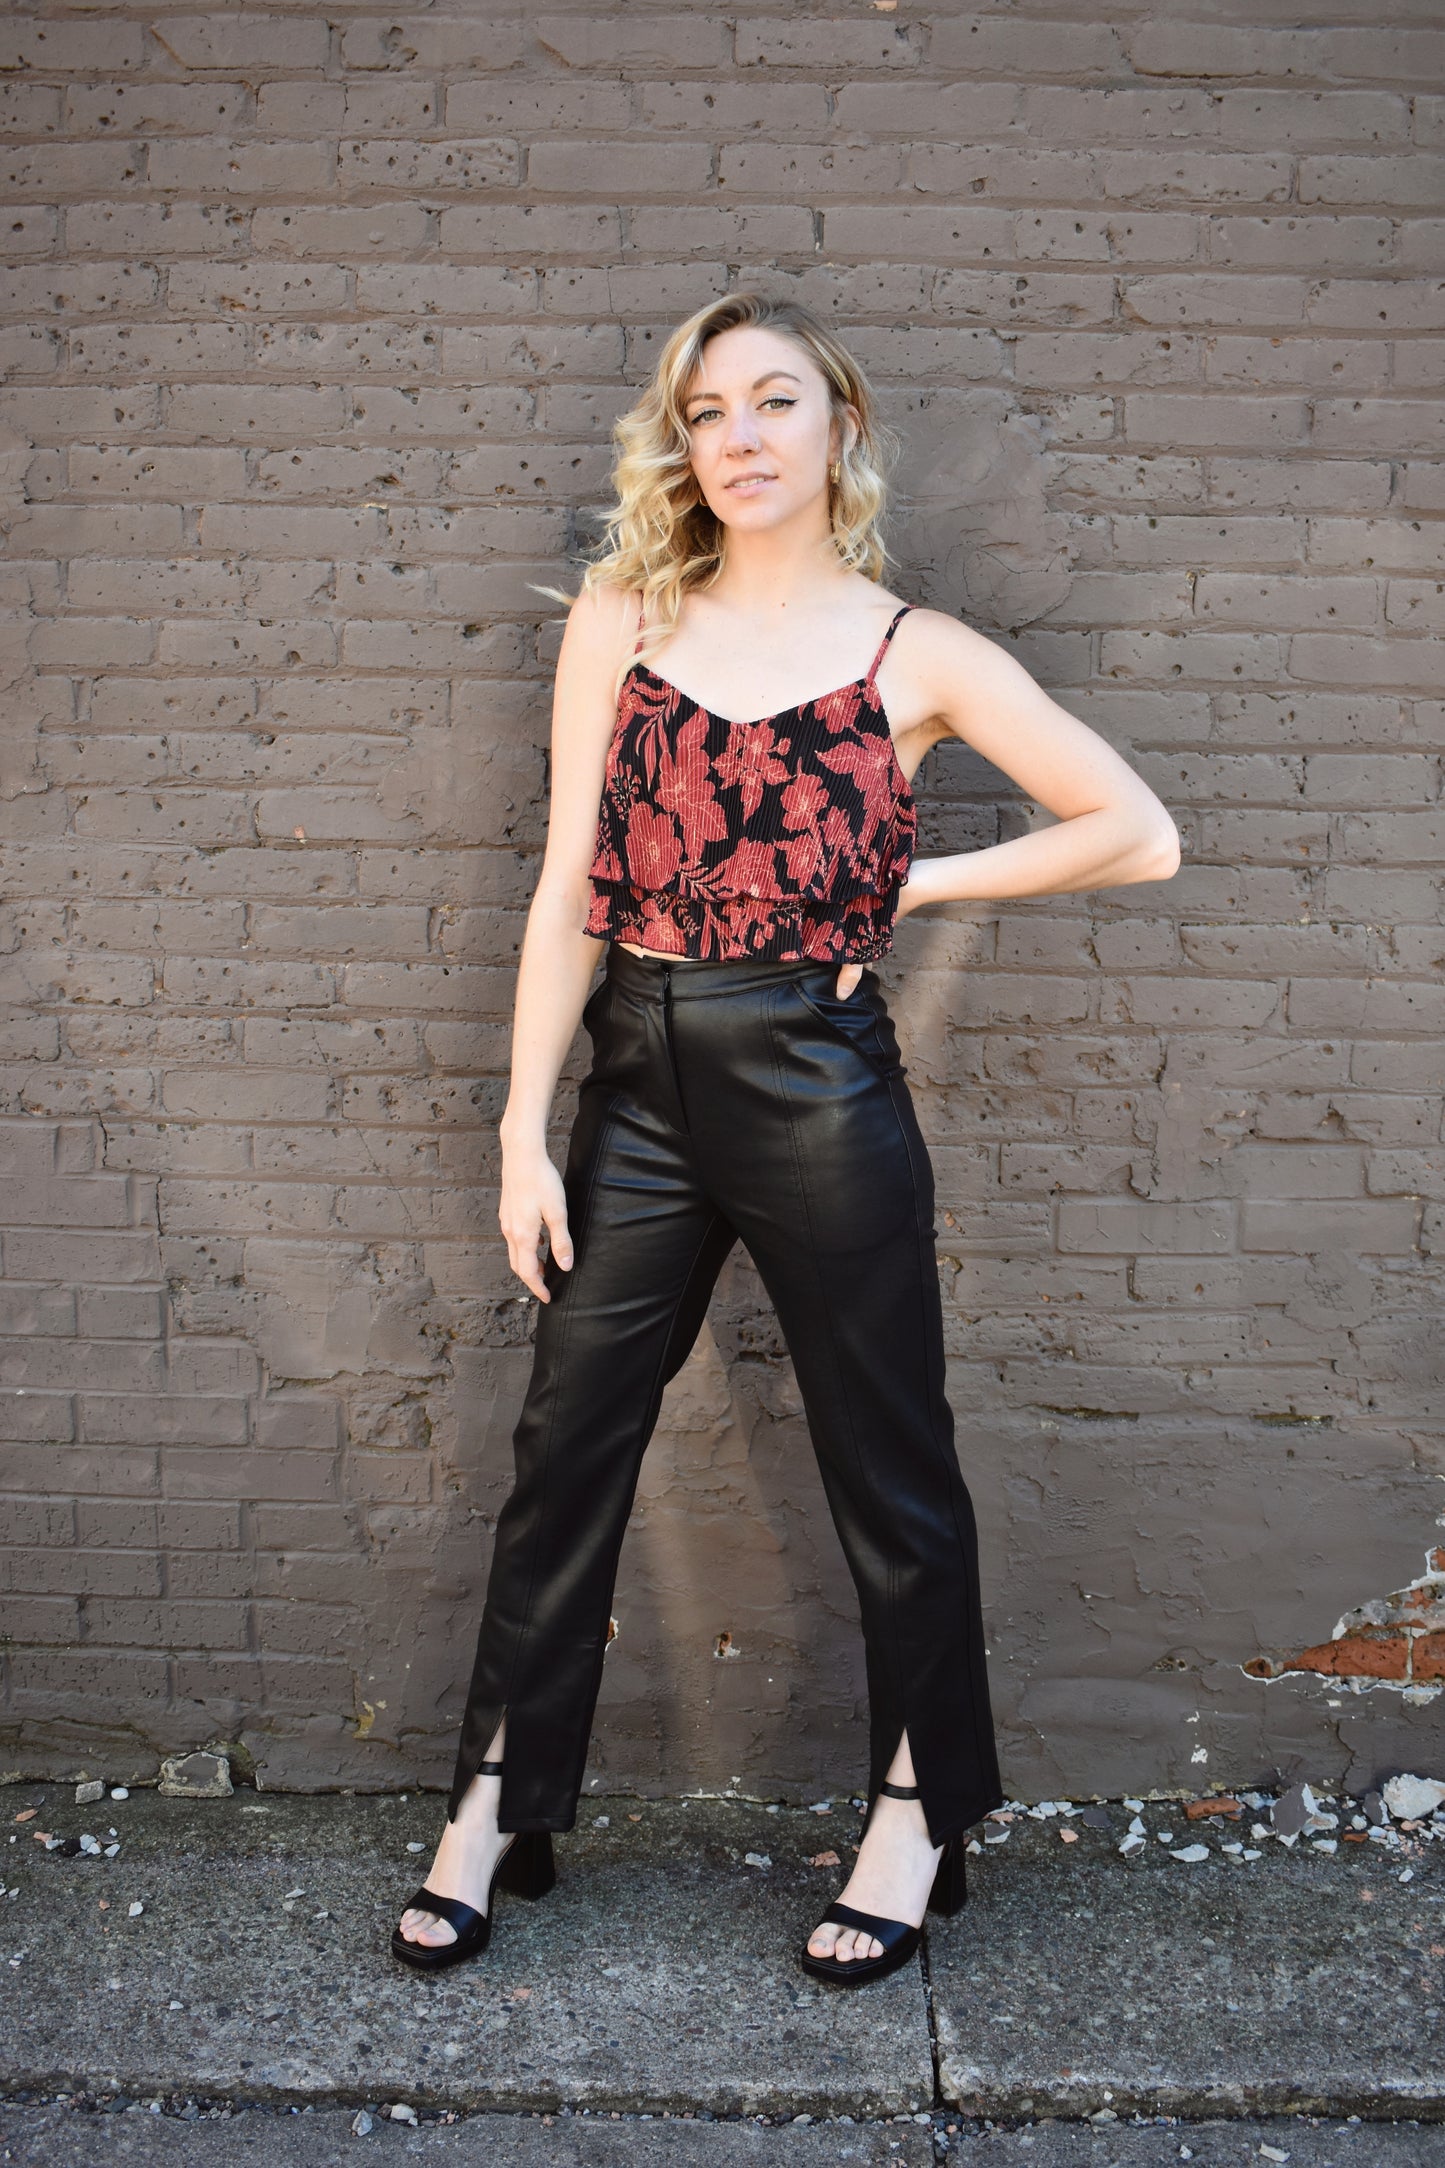 Pleated black, red and tan floral print cropped cami top (flowy) and high waisted wide leg pants set